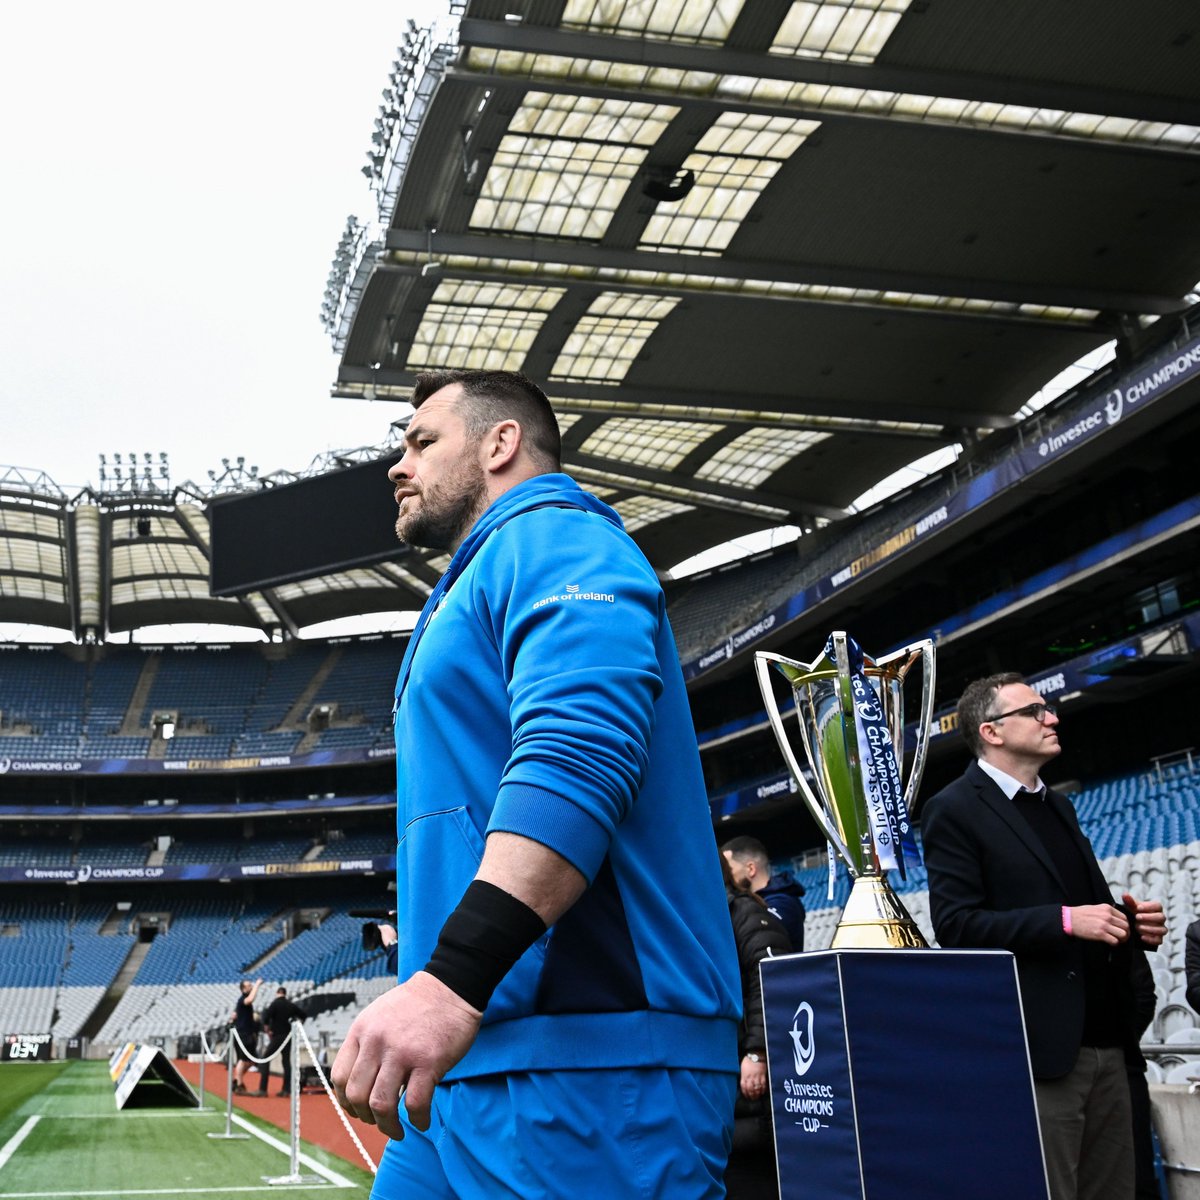 𝟏𝟓 𝐲𝐞𝐚𝐫𝐬 𝐢𝐧 𝐭𝐡𝐞 𝐛𝐥𝐢𝐧𝐤 𝐨𝐟 𝐚𝐧 𝐞𝐲𝐞! @ProperChurch is set to become the all-time appearance holder in the history of the @ChampionsCup tomorrow He's currently at 110 caps and counting... #LEIvNOR #FromTheGroundUp